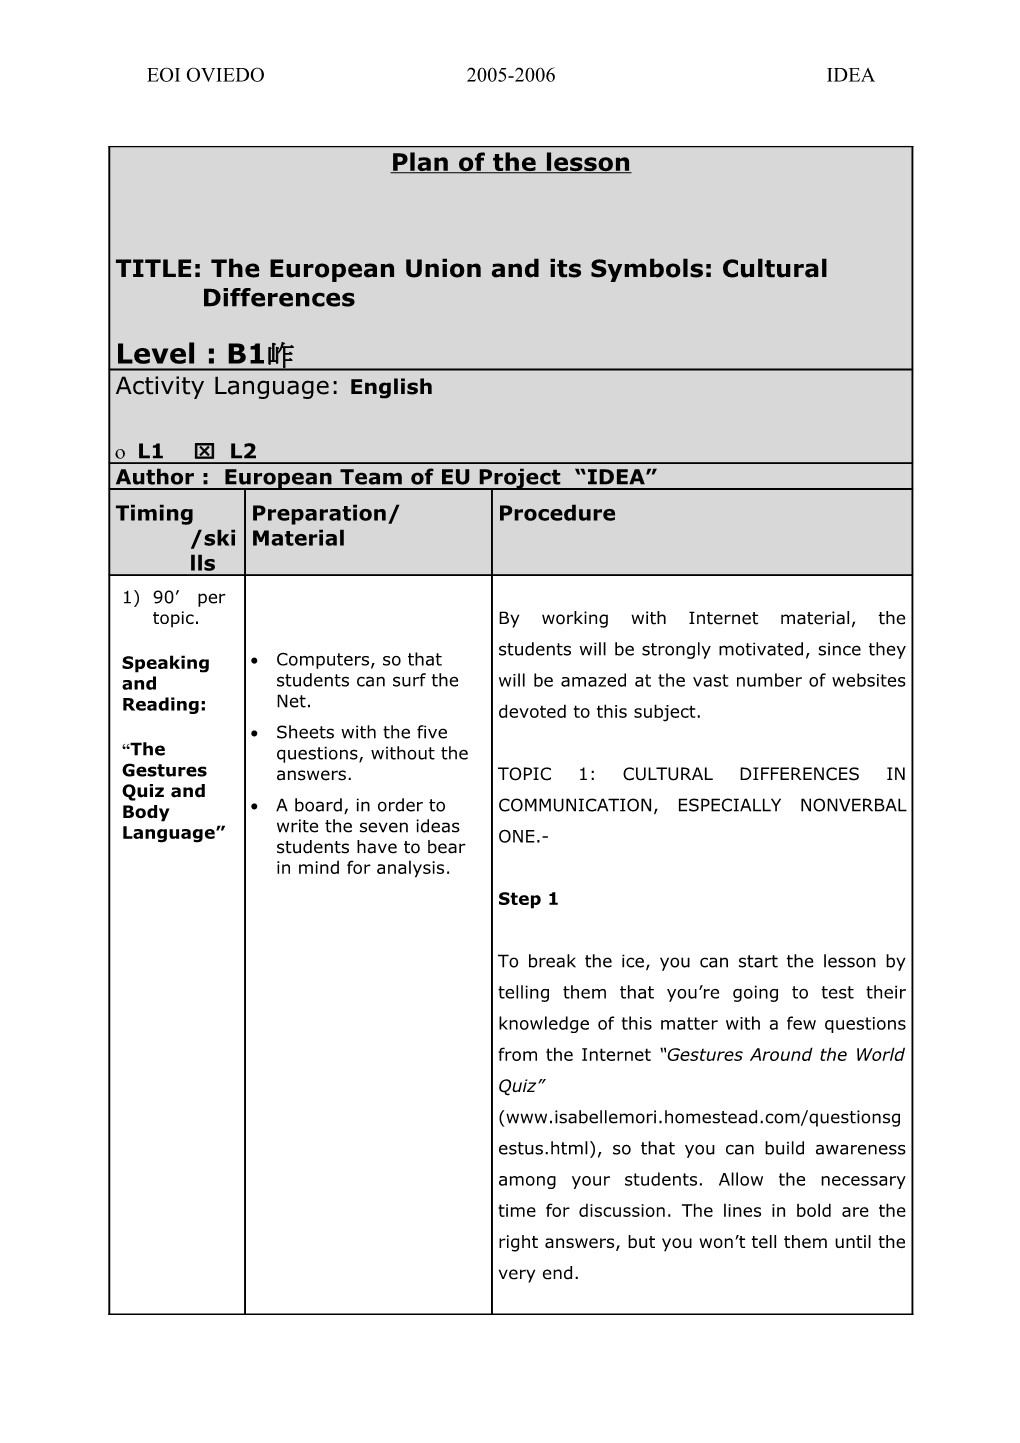 TITLE: the European Union and Its Symbols: Cultural Differences